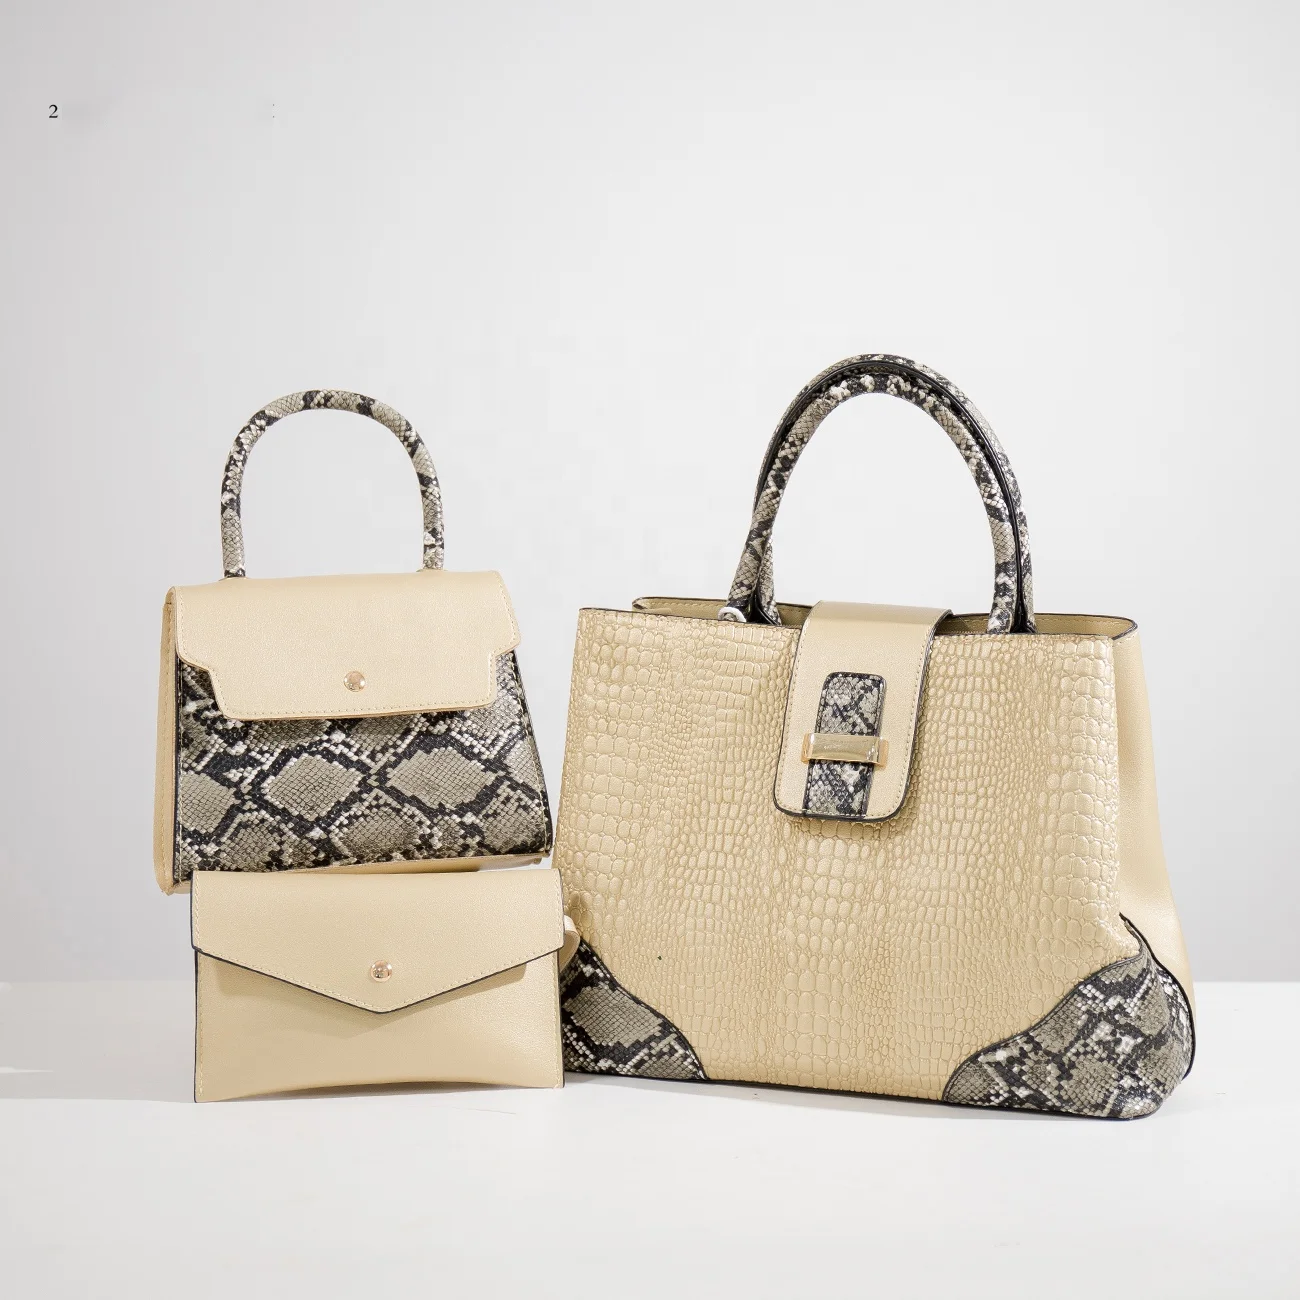 

Wholesale sac a main 3 in 1 set Snakeskin Designer latest bags women luxury handbags ladies direct from china, 7color